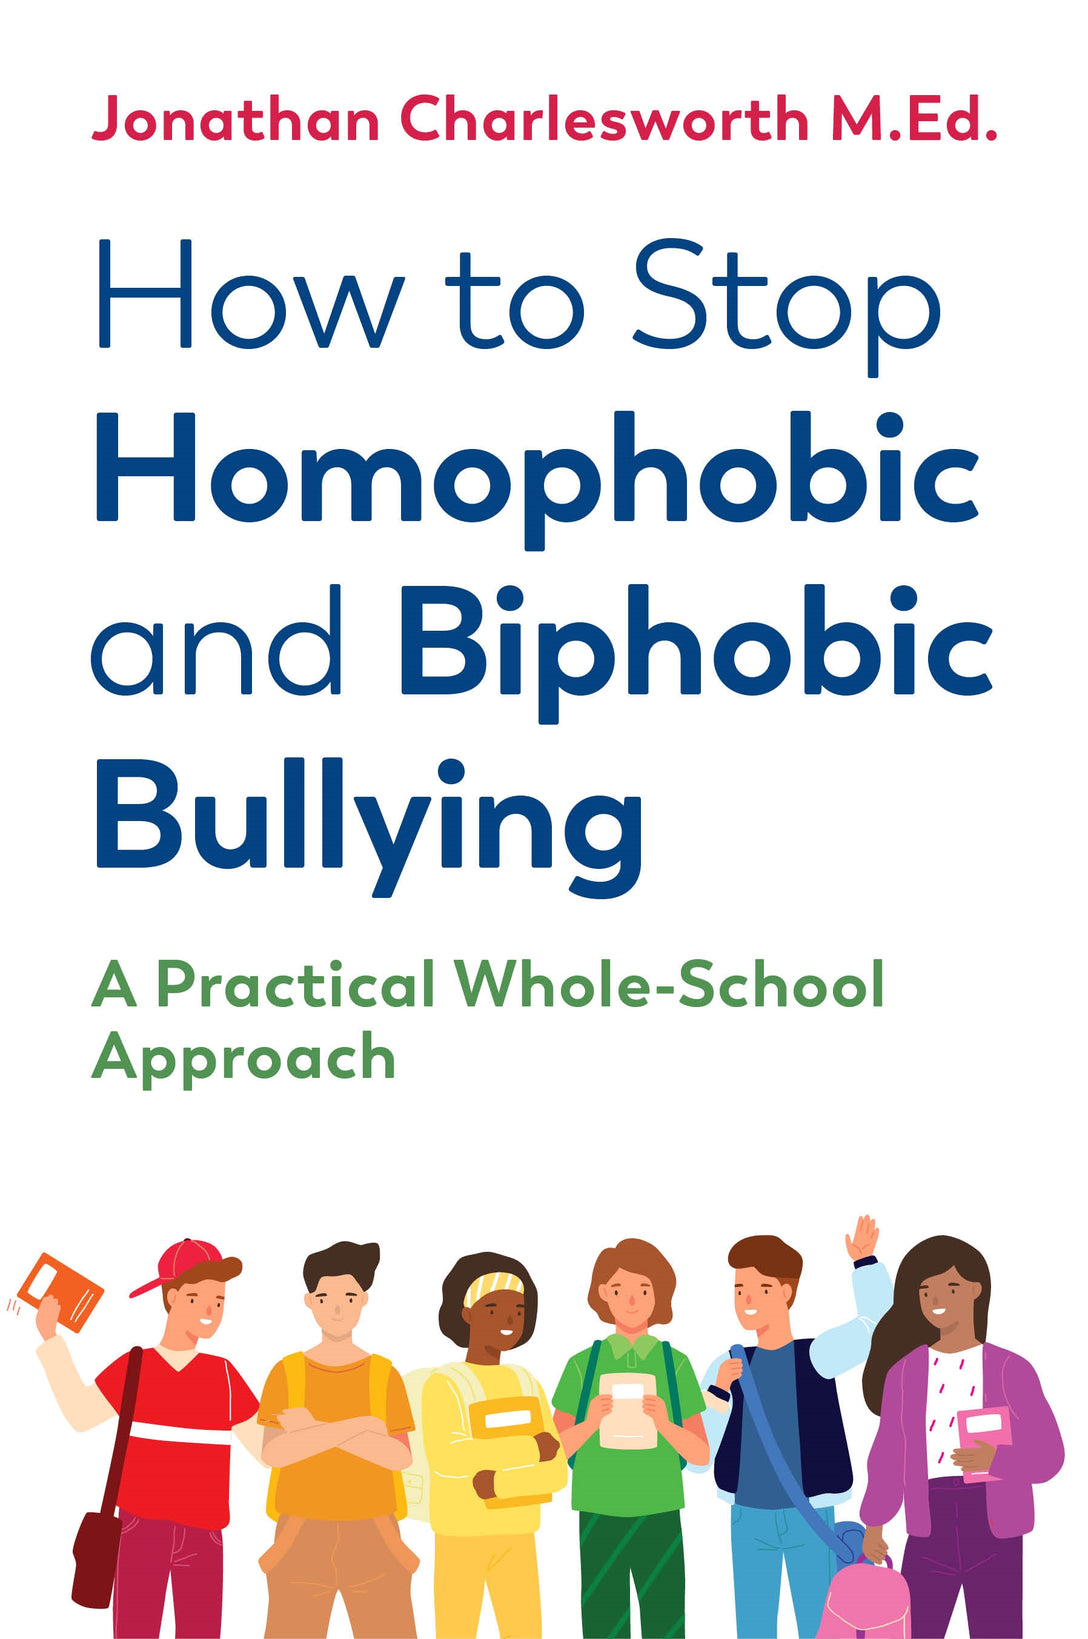 How to Stop Homophobic and Biphobic Bullying by Prof Peter Smith, Jonathan Charlesworth